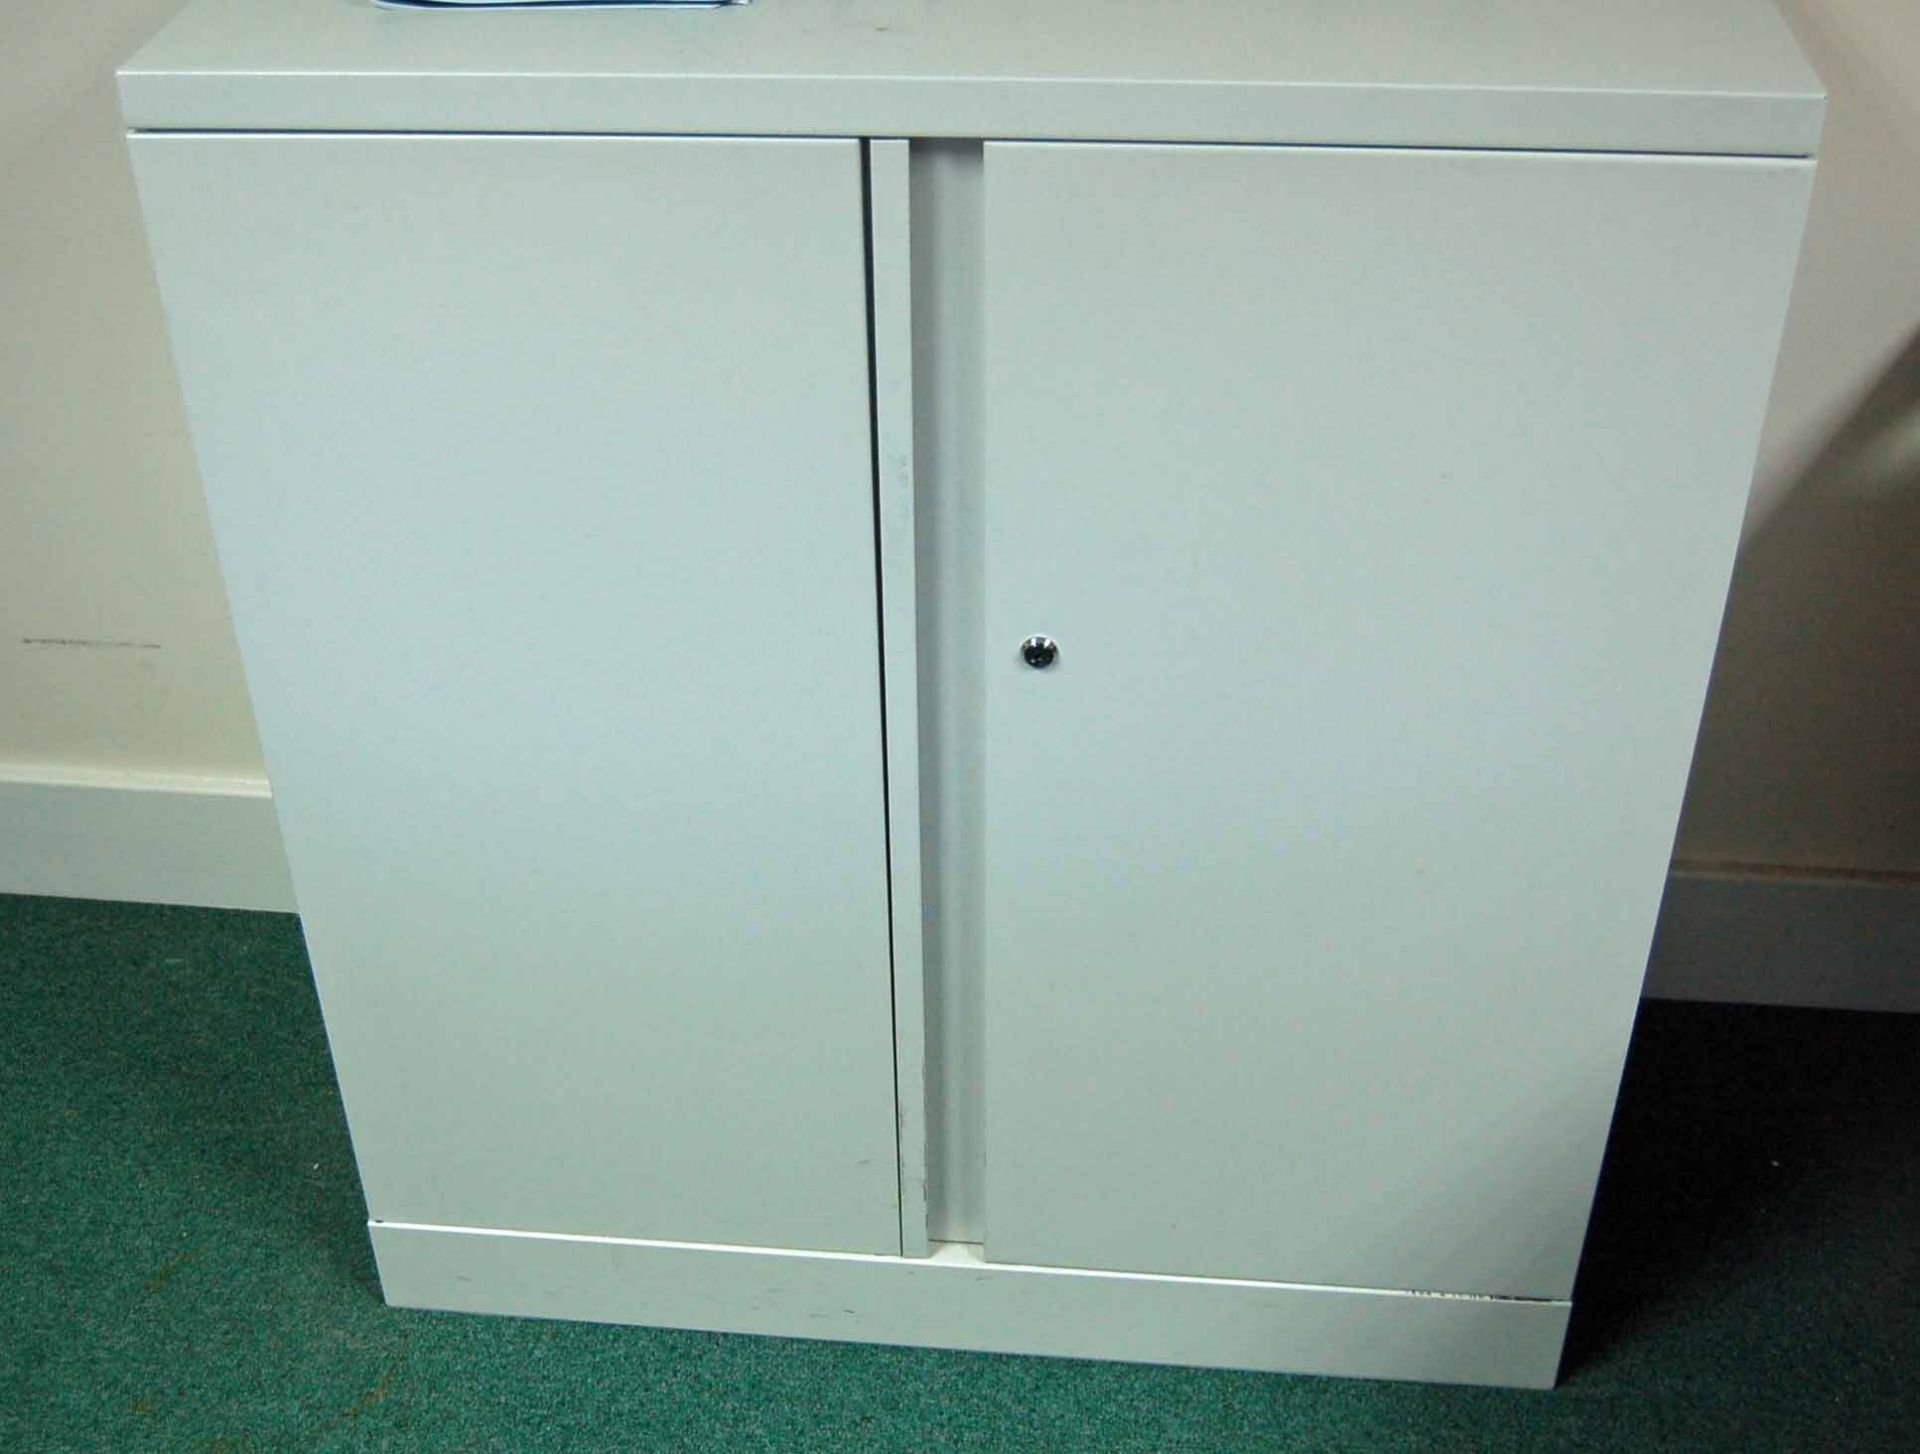 Two TRIUMPH 4-Drawer Filing Cabinets and A 1000mm x 1000mm Grey Steel 2-Door Stationery Cupboard - Image 2 of 2